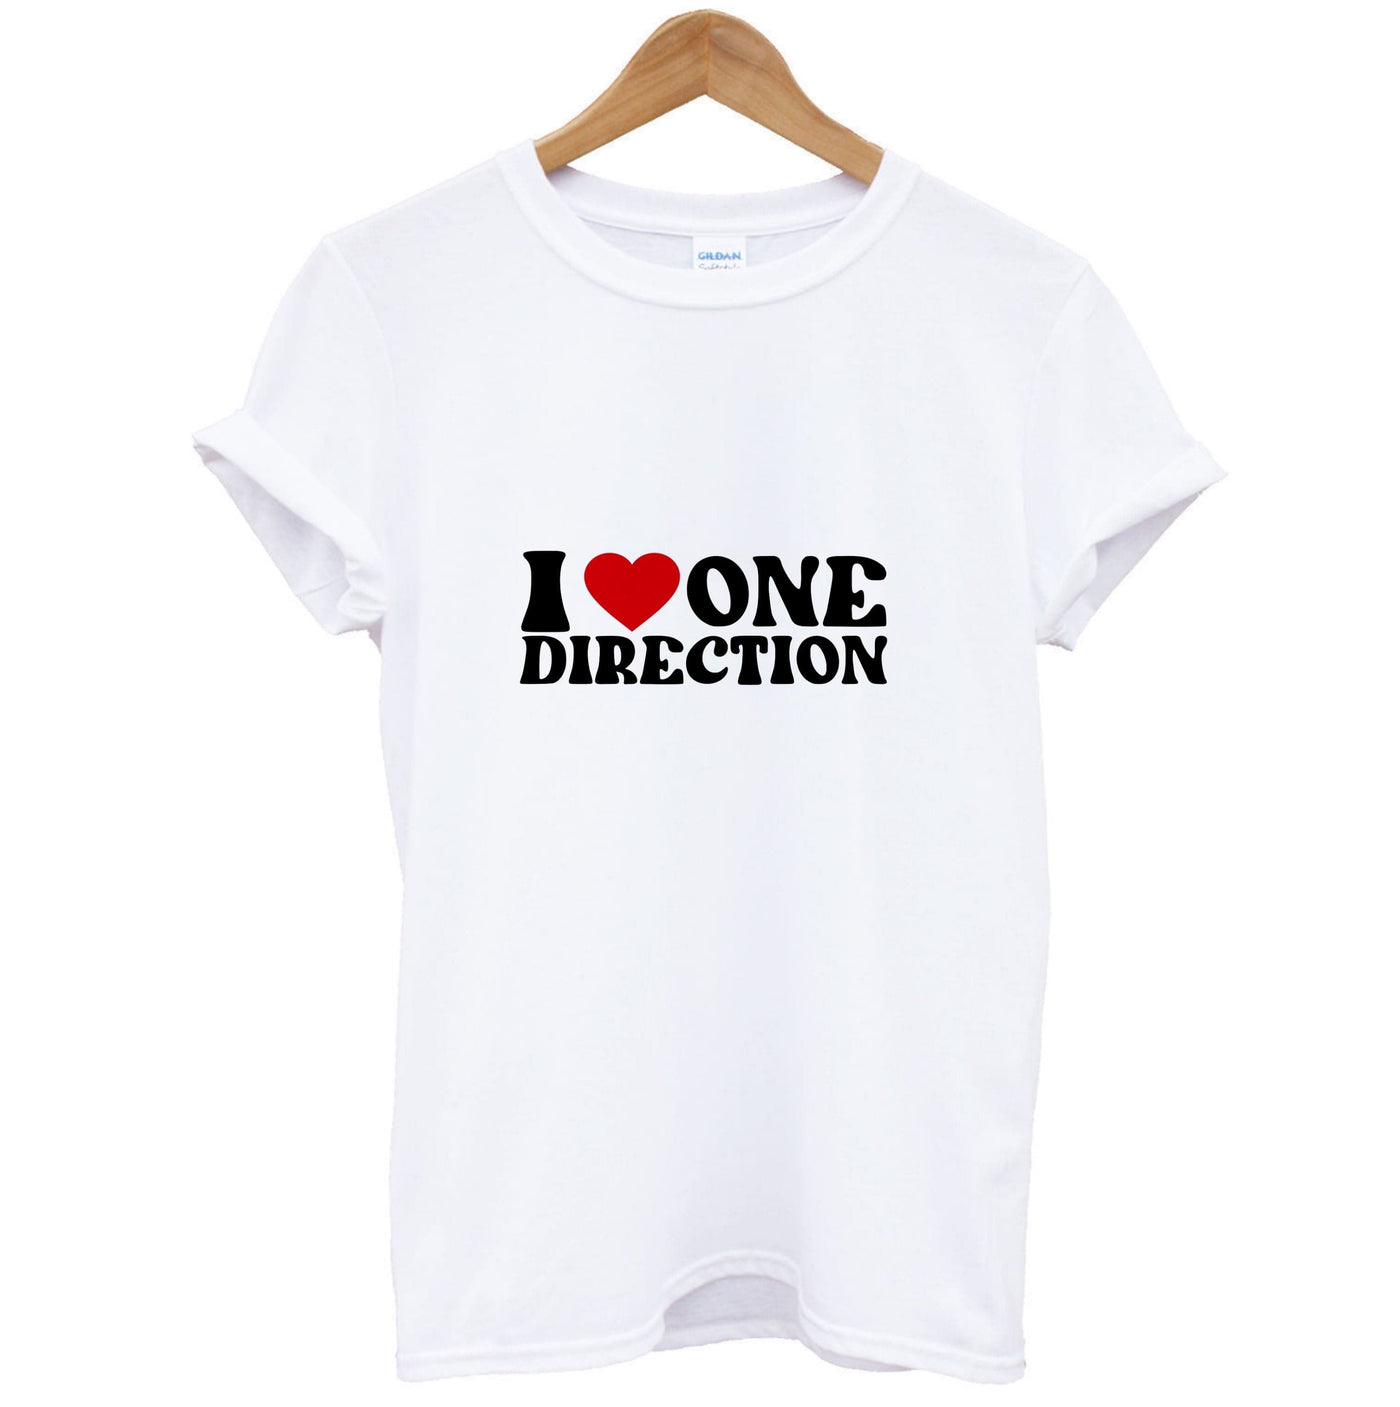 I Love One Direction T-Shirt